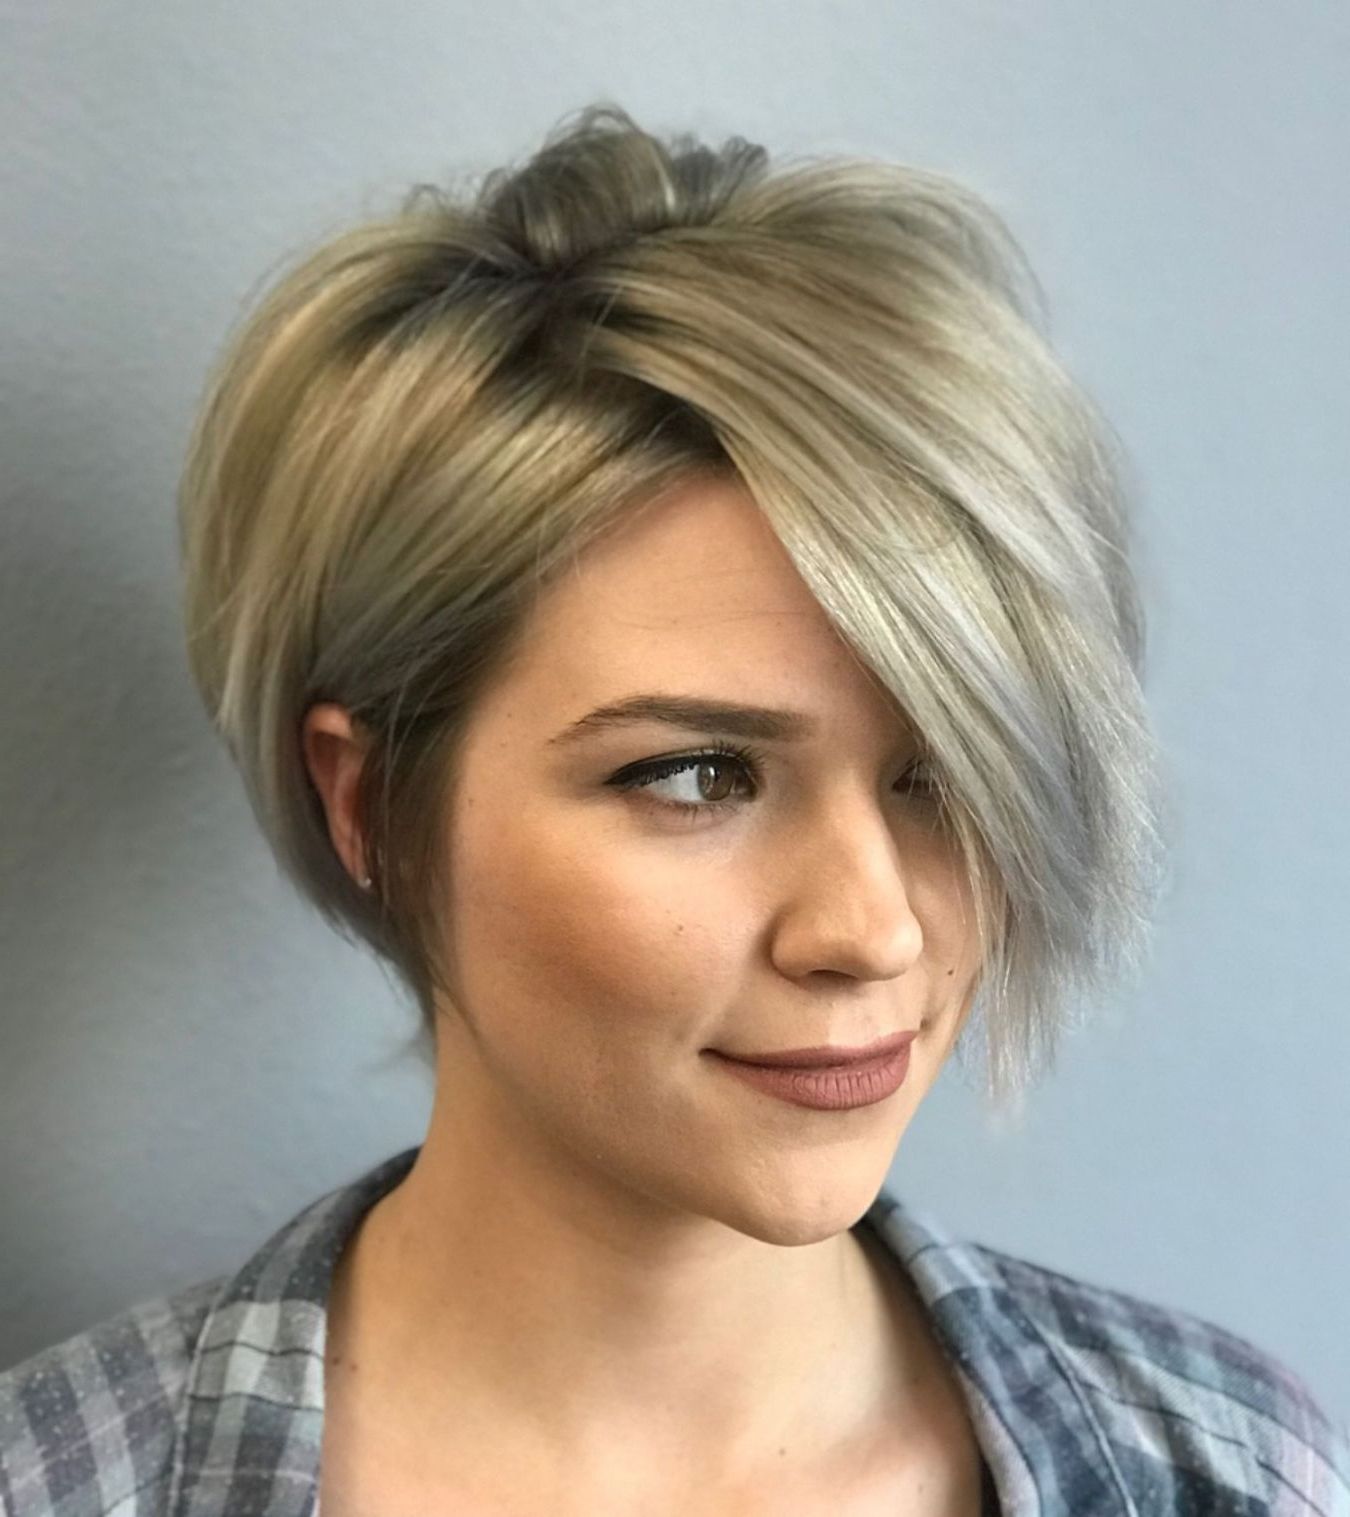 Hairstyles : Shaggy Blonde Bob With Highlights Most Within Short Highlighted Shaggy Haircuts (View 12 of 20)